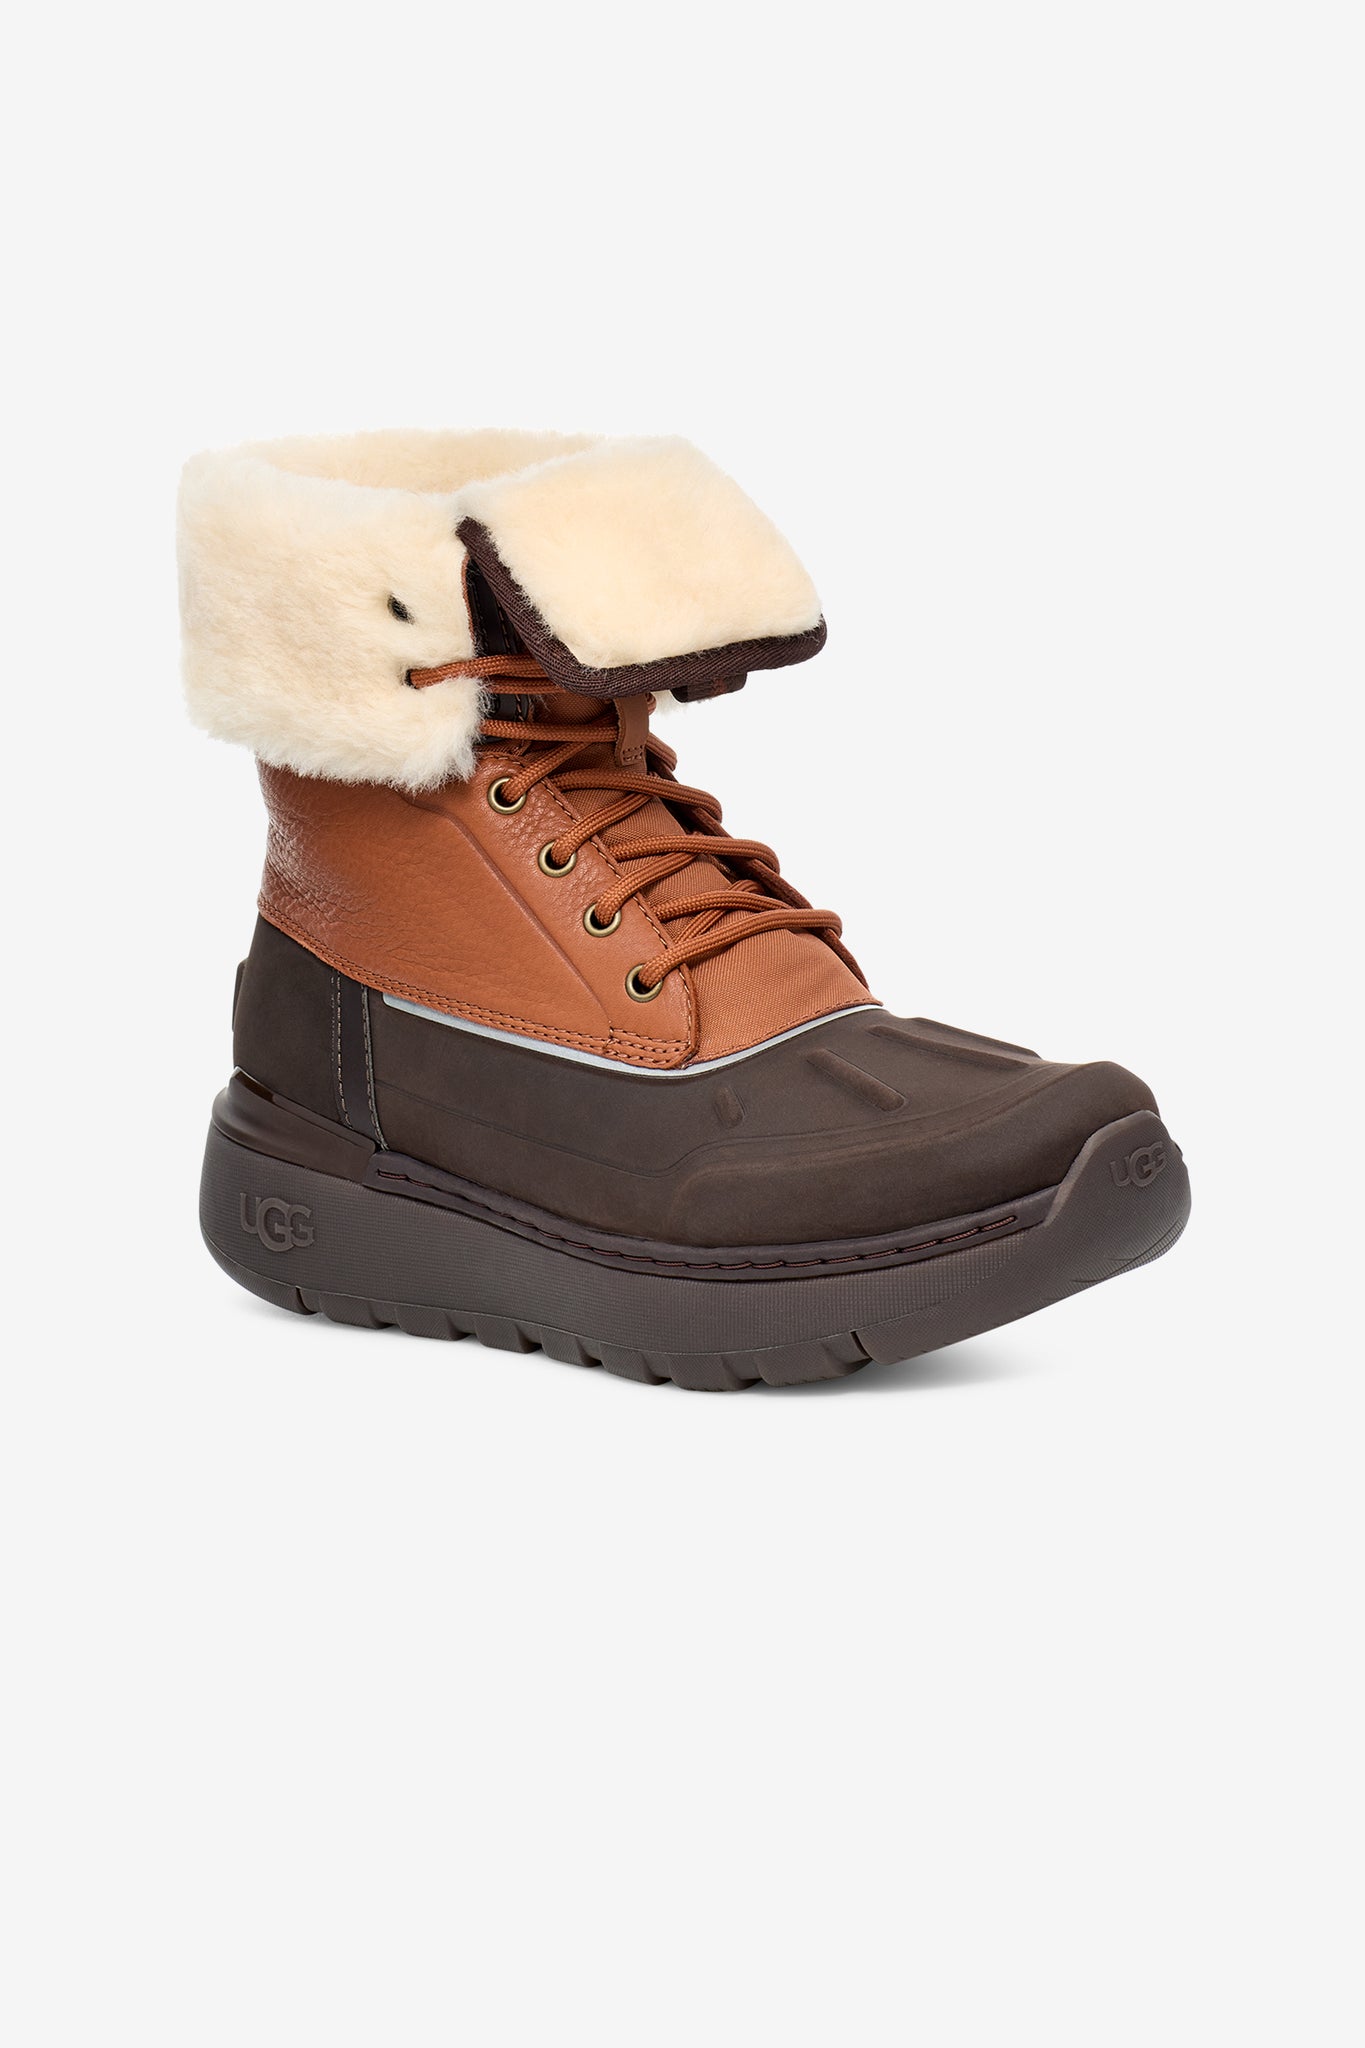 UGG Men's City Butte Boot in Worchester